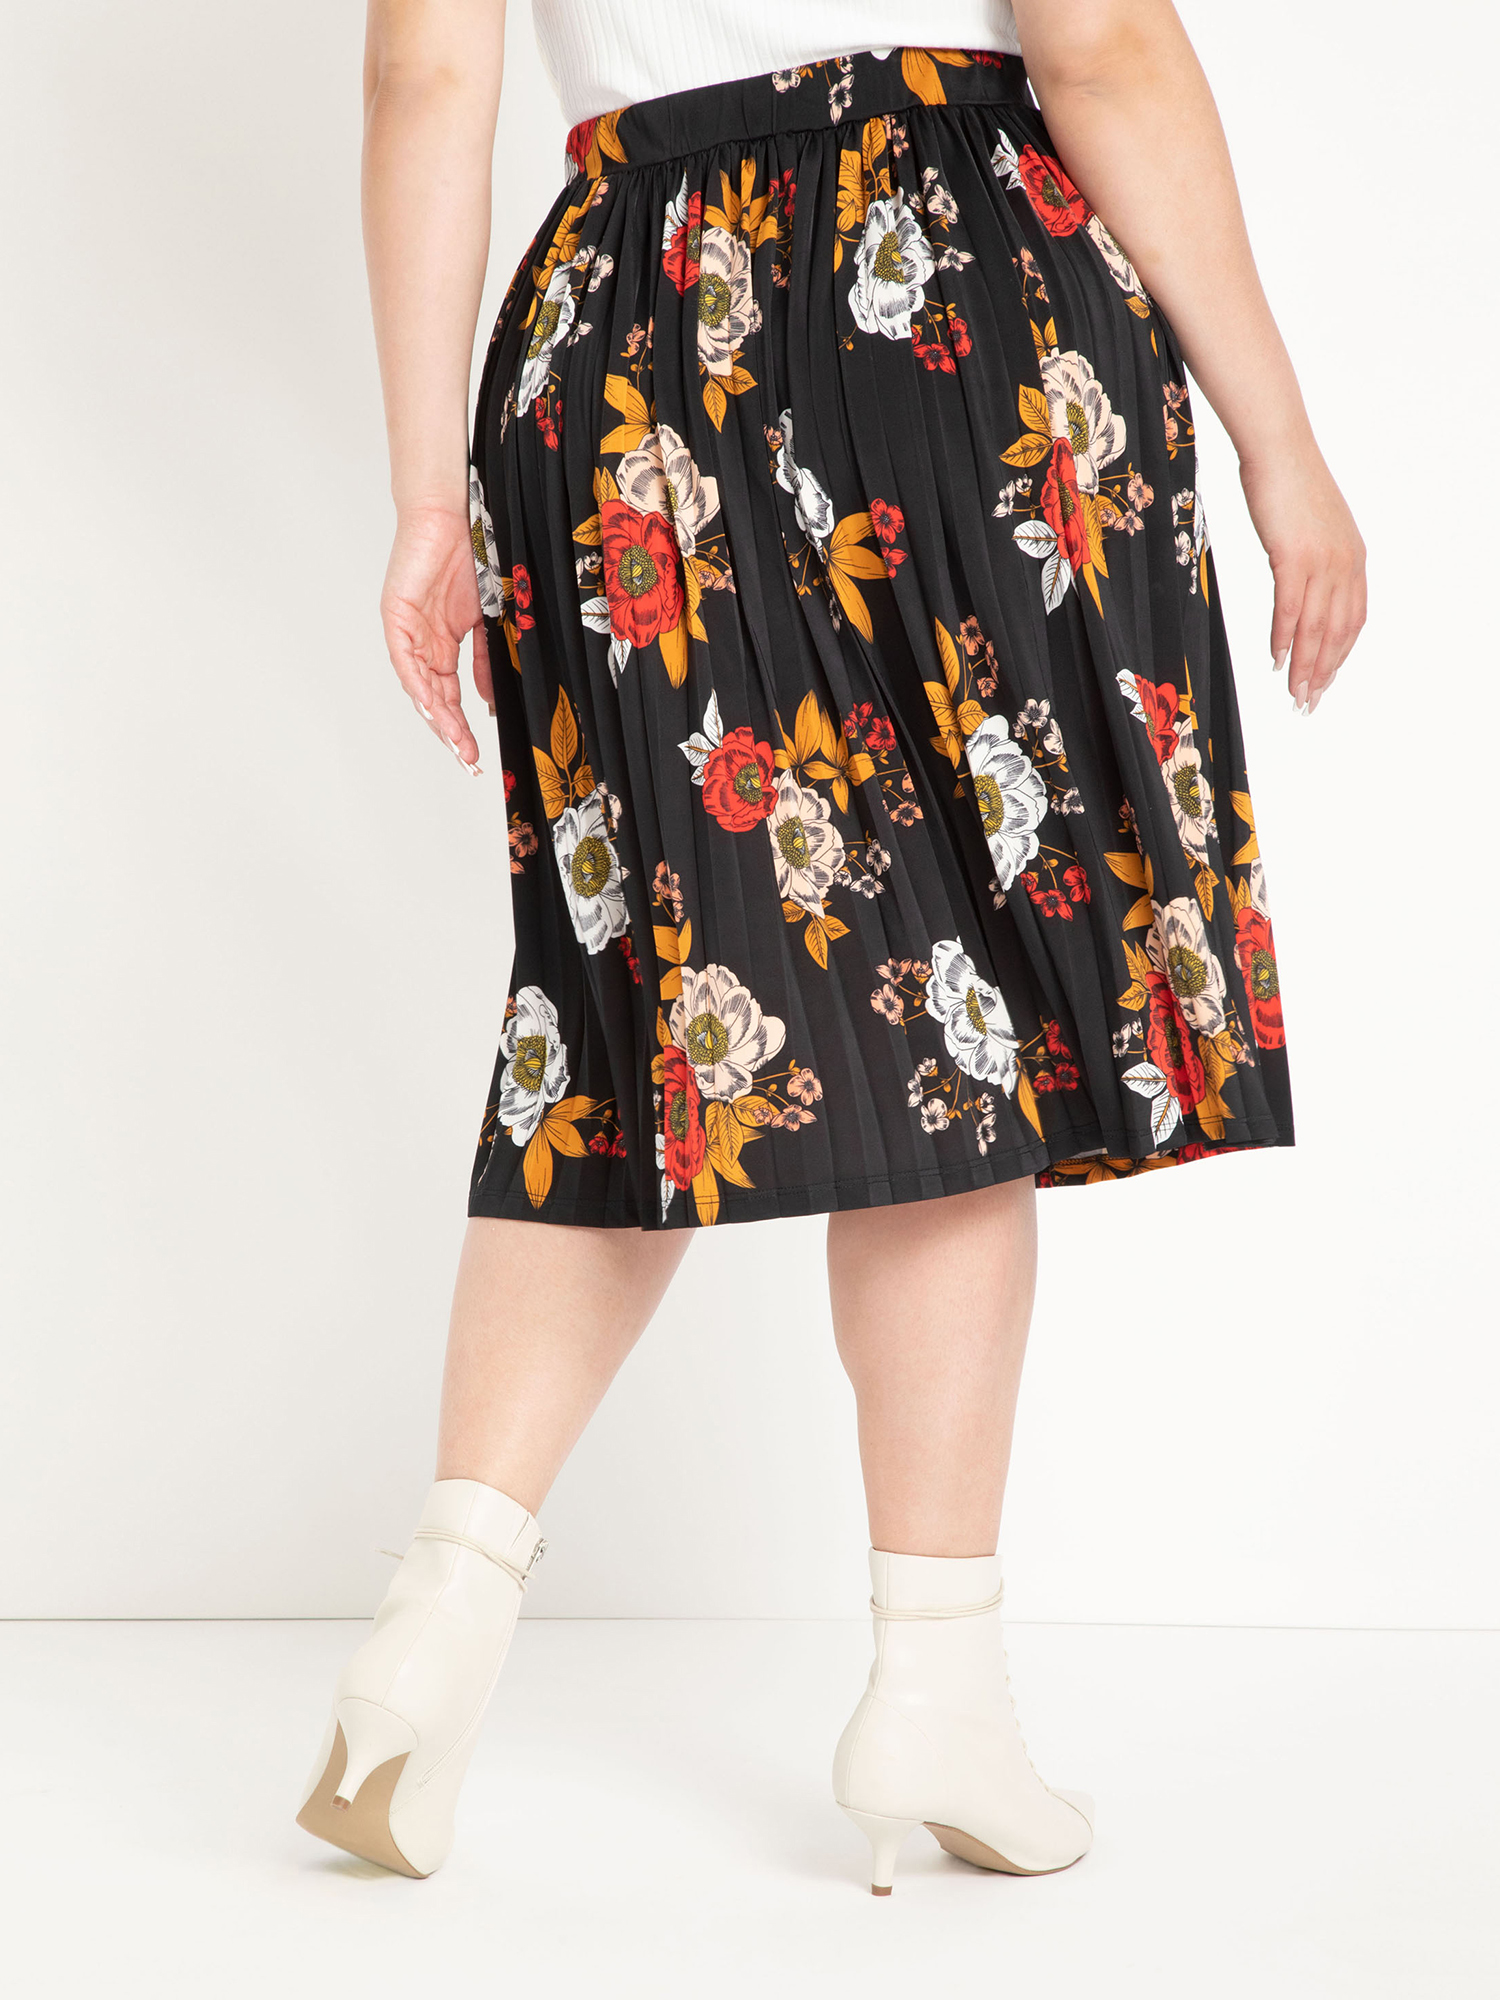 ELOQUII Elements Women's Plus Size Multi Floral Pleated Midi Skirt - image 3 of 3